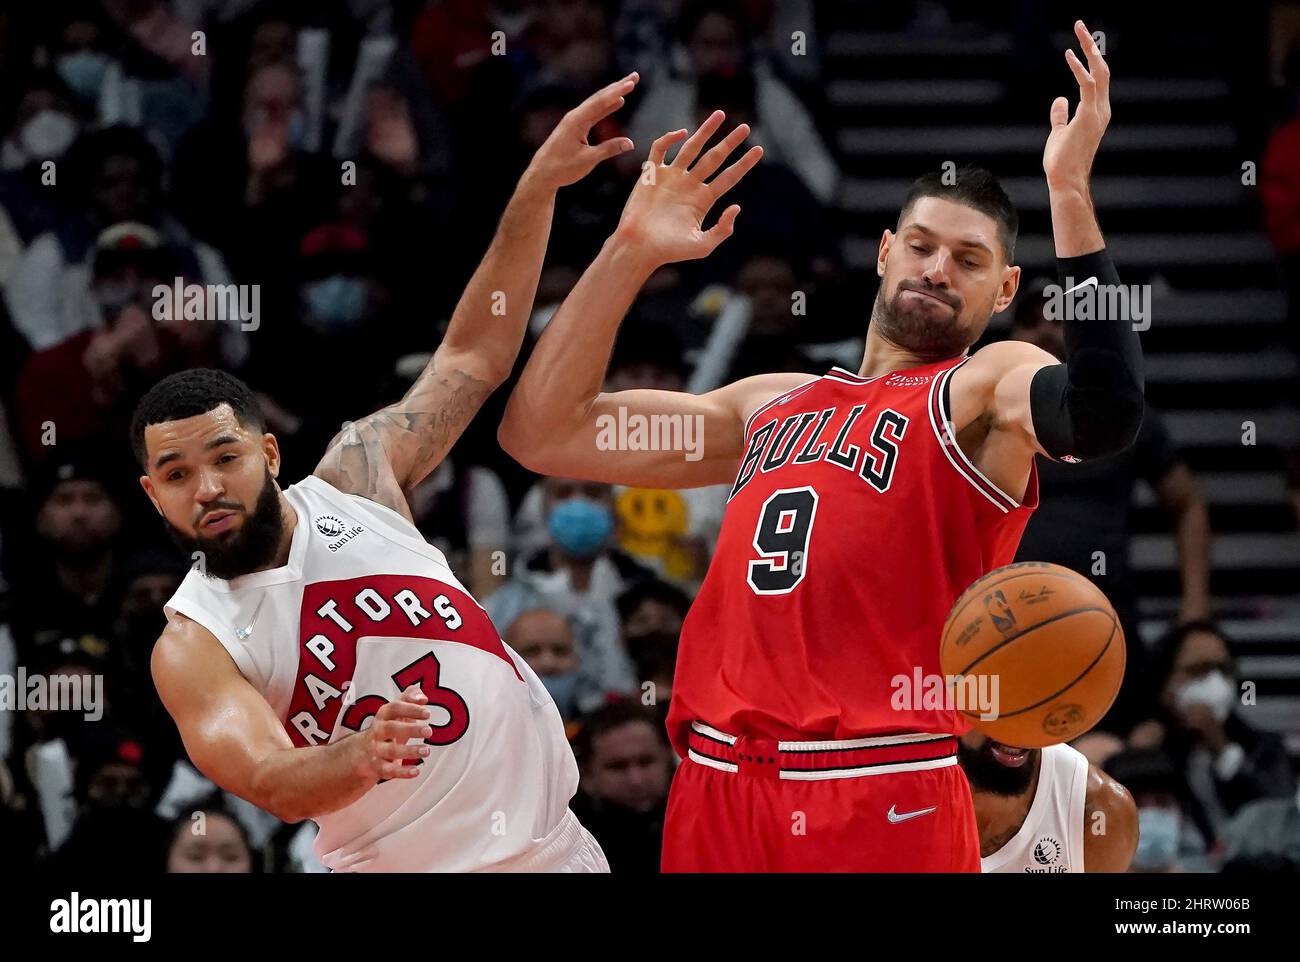 October 9, 2022, TORONTO, ON, CANADA: Chicago Bulls centre Nikola Vucevic  (9) dunks the ball, despite the defence of Toronto Raptors player Scottie  Barnes (4) during the first quarter of an NBA